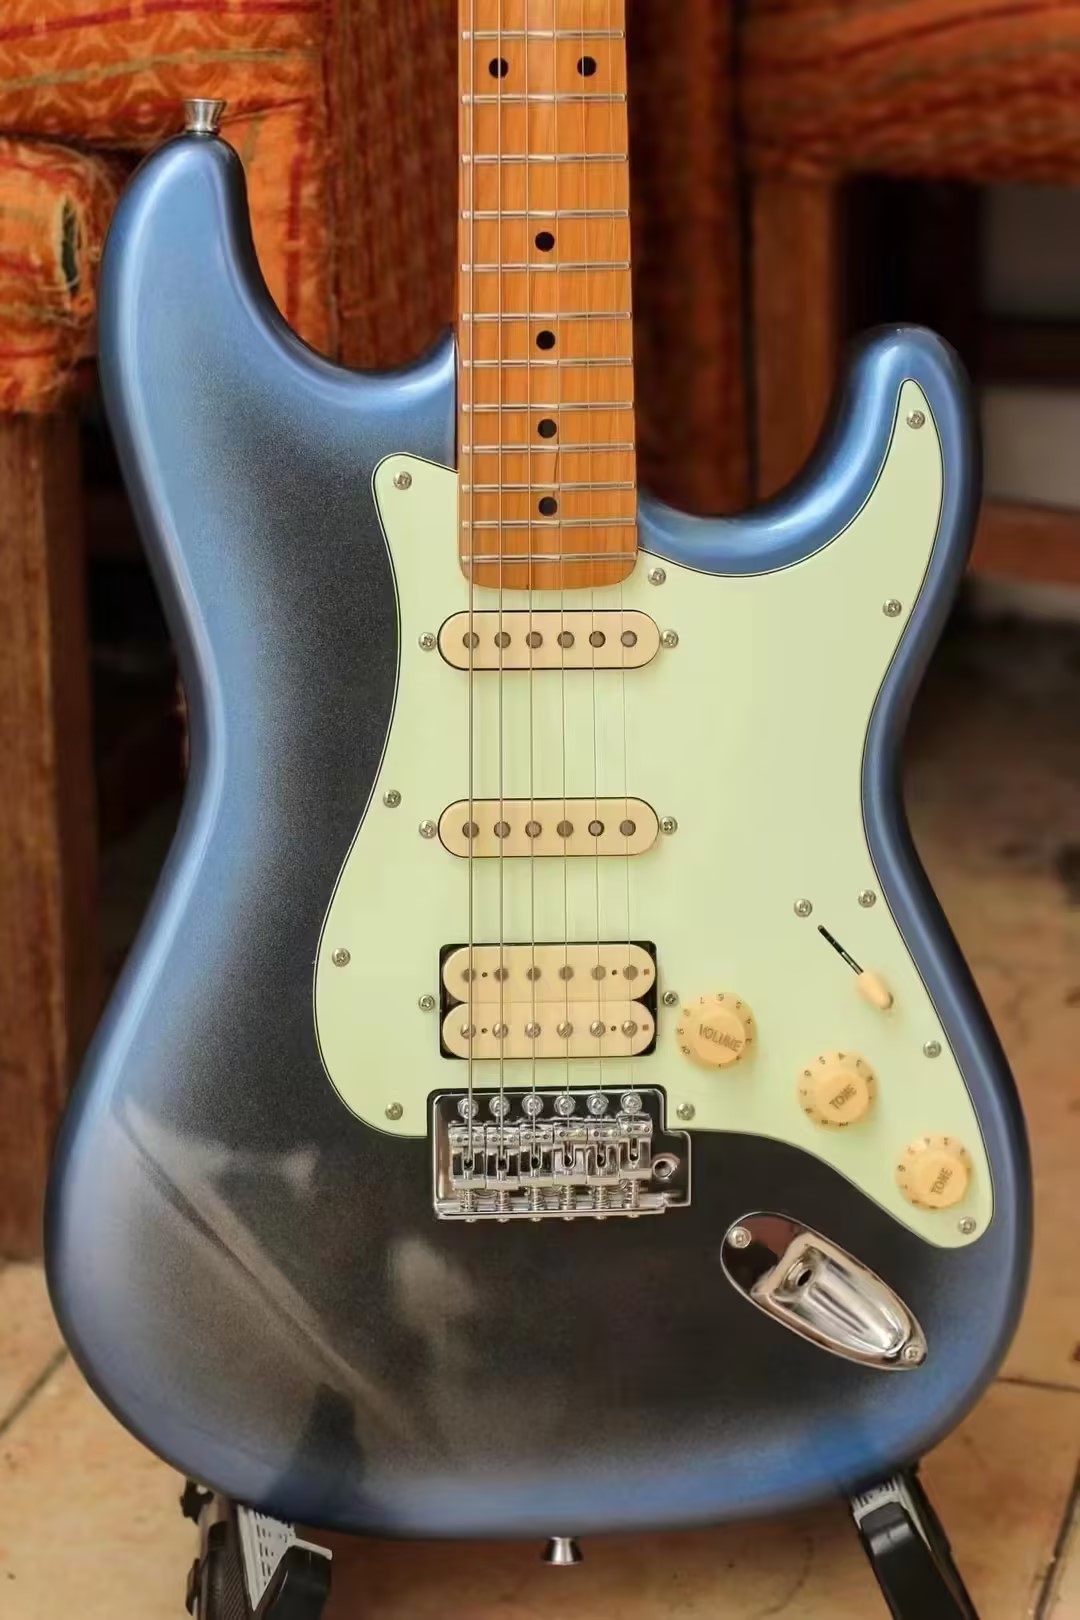 Classic Choice: The Timeless Charm of The Stratocaster Electric Guitar